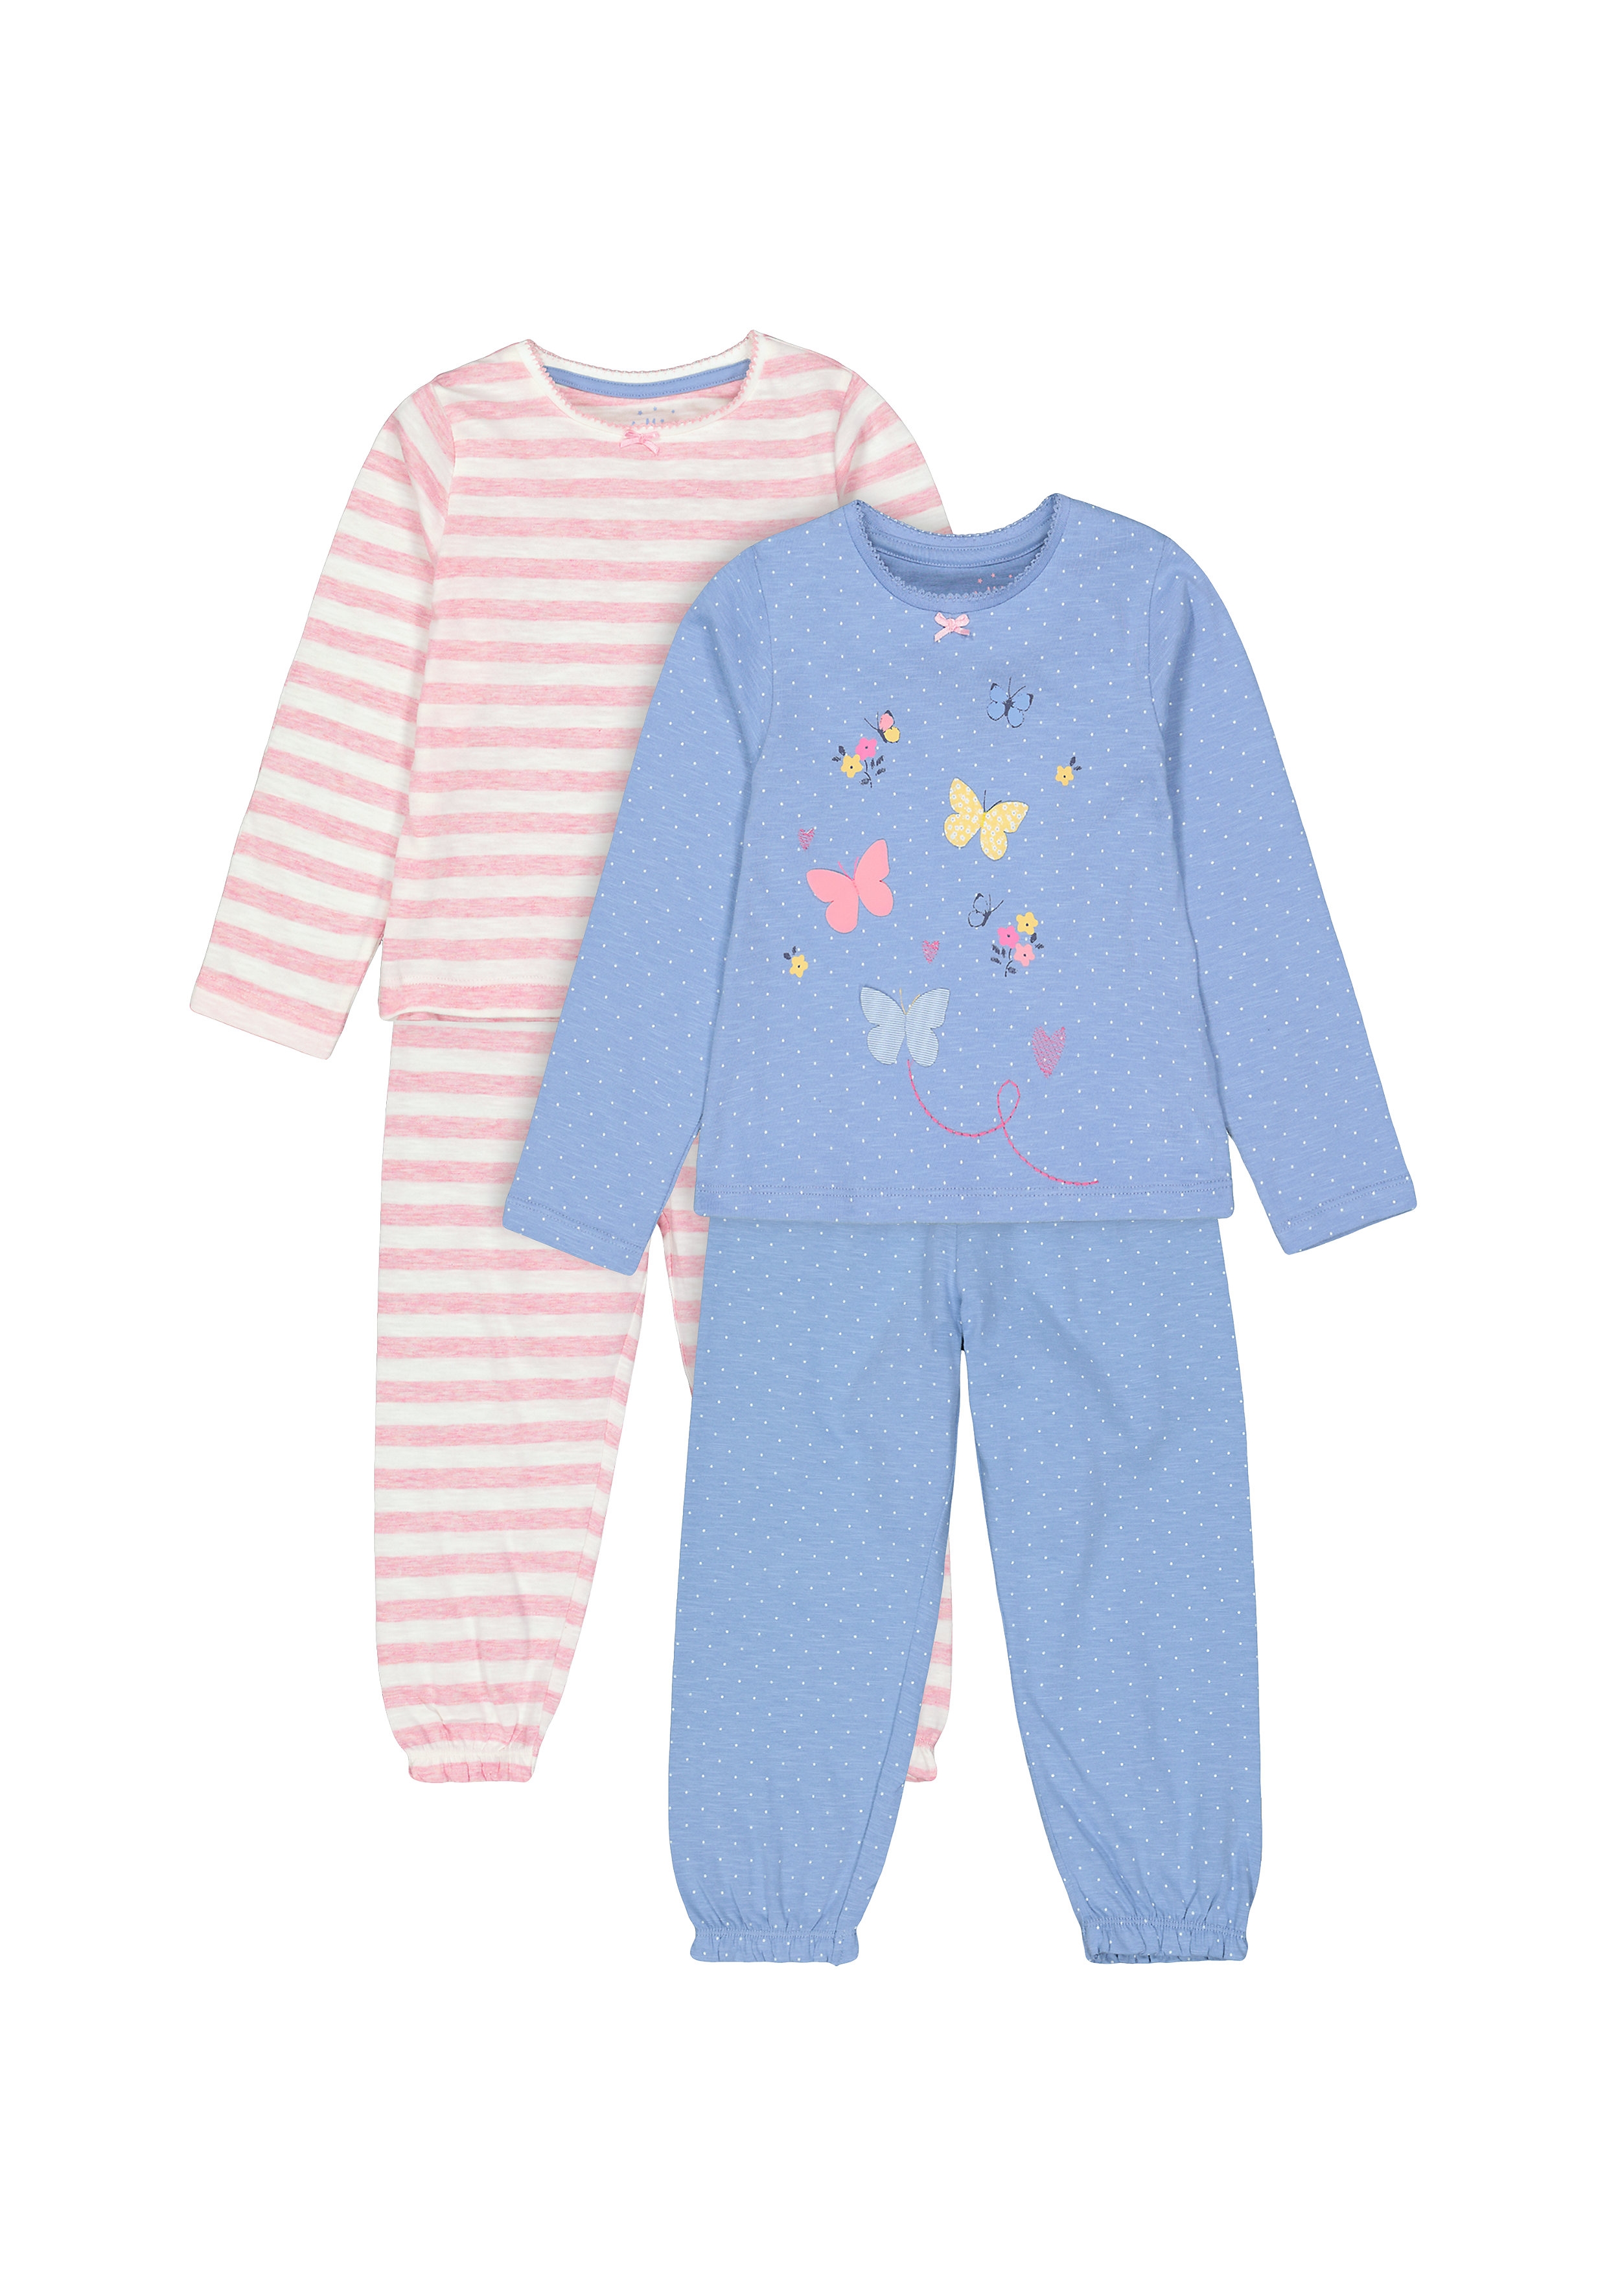 Mothercare | Girls Full sleeves Stripe and butterfly print Pyjamas - Pack of 2 - Multicolor